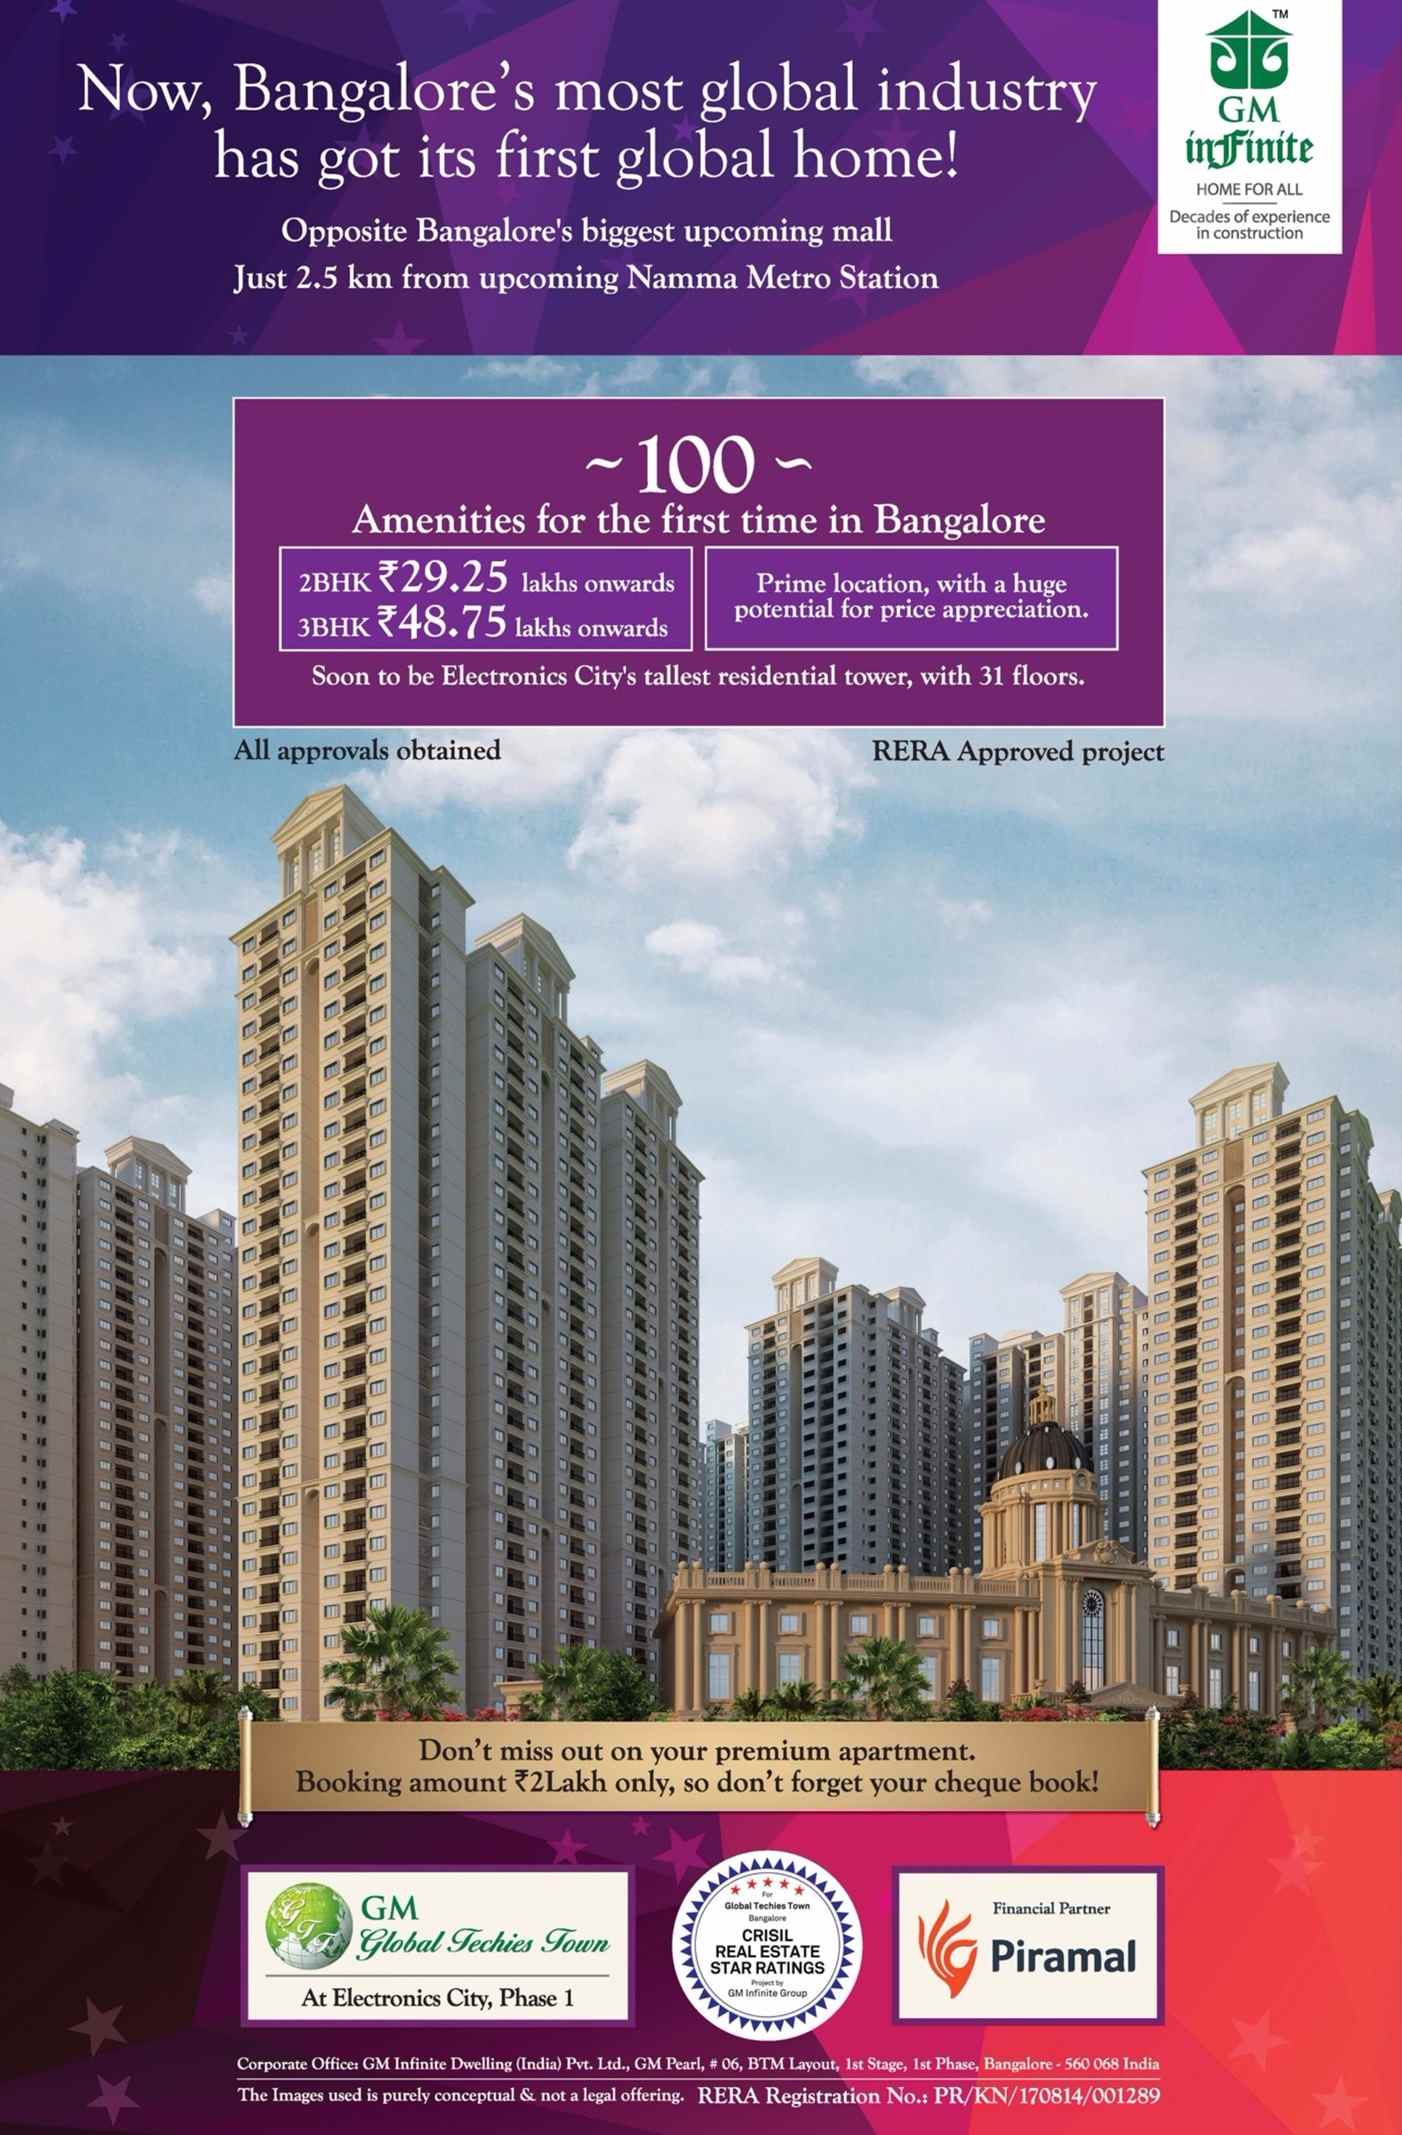 Experience 100 amenities for the first time at GM Global Techies Town in Bangalore